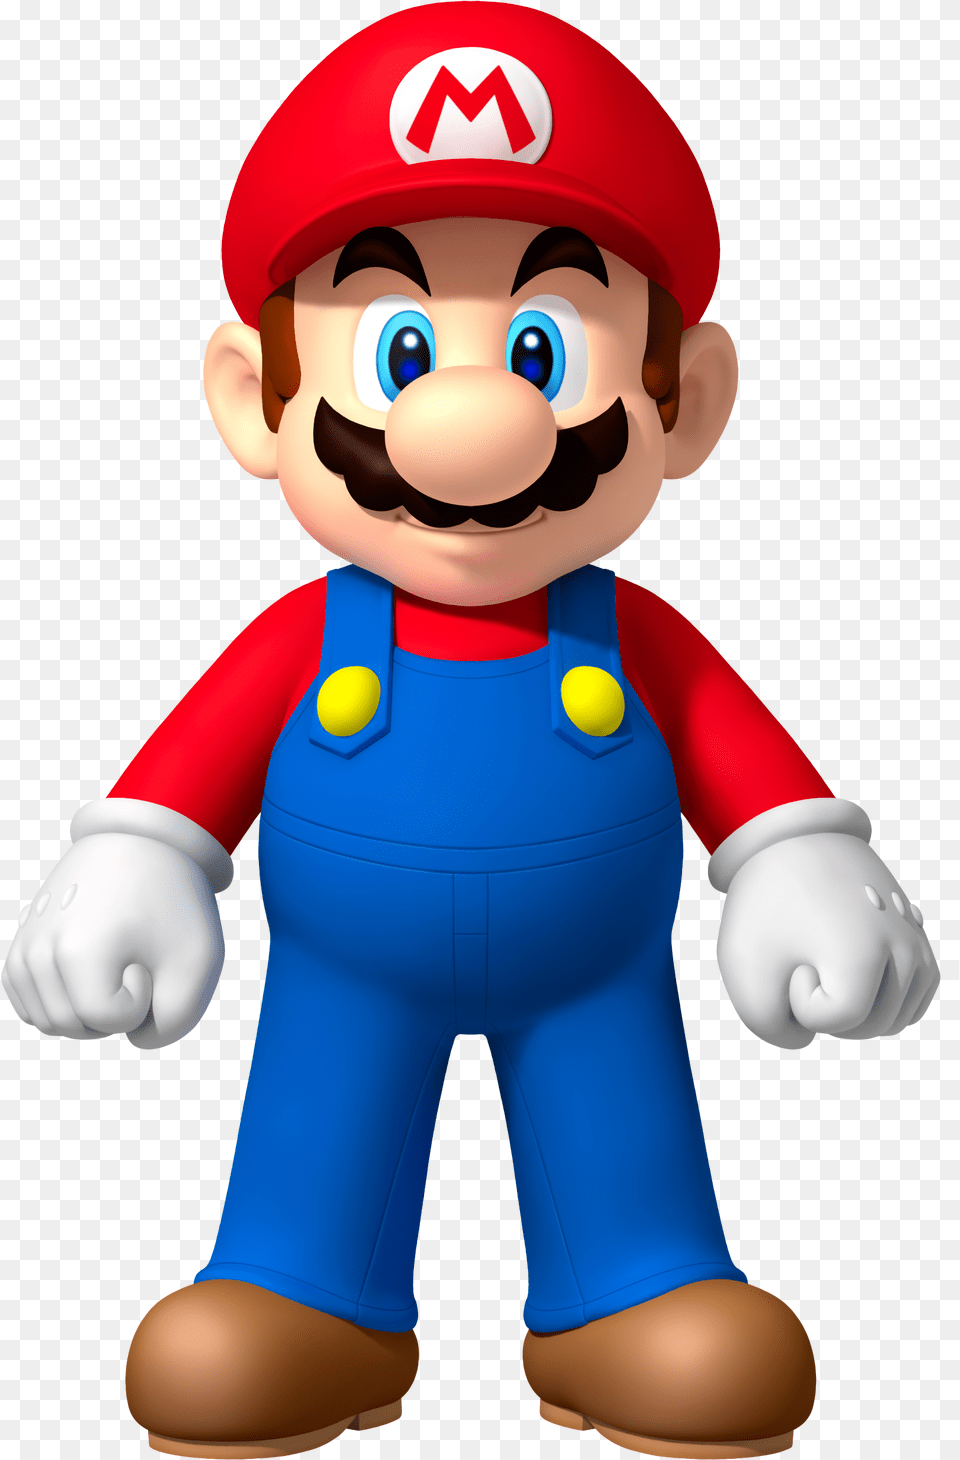 Image Px Marionsmbwii Mariowiki Image Super Mario, Baby, Person, Game, Super Mario Free Png